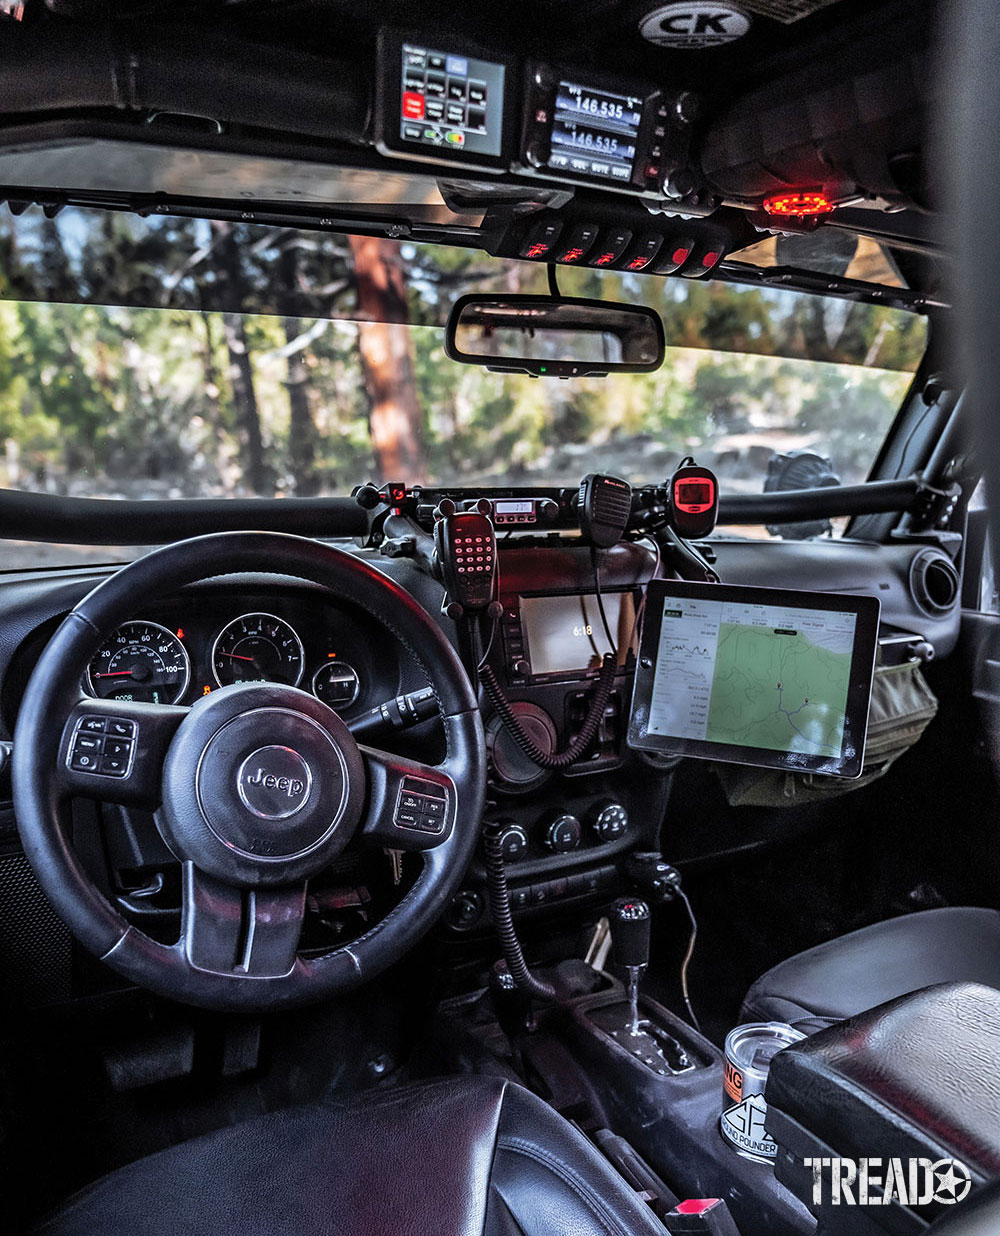 The cockpit of HQ1 shows all the comms needed and the rocker switch panel to control lights and more.